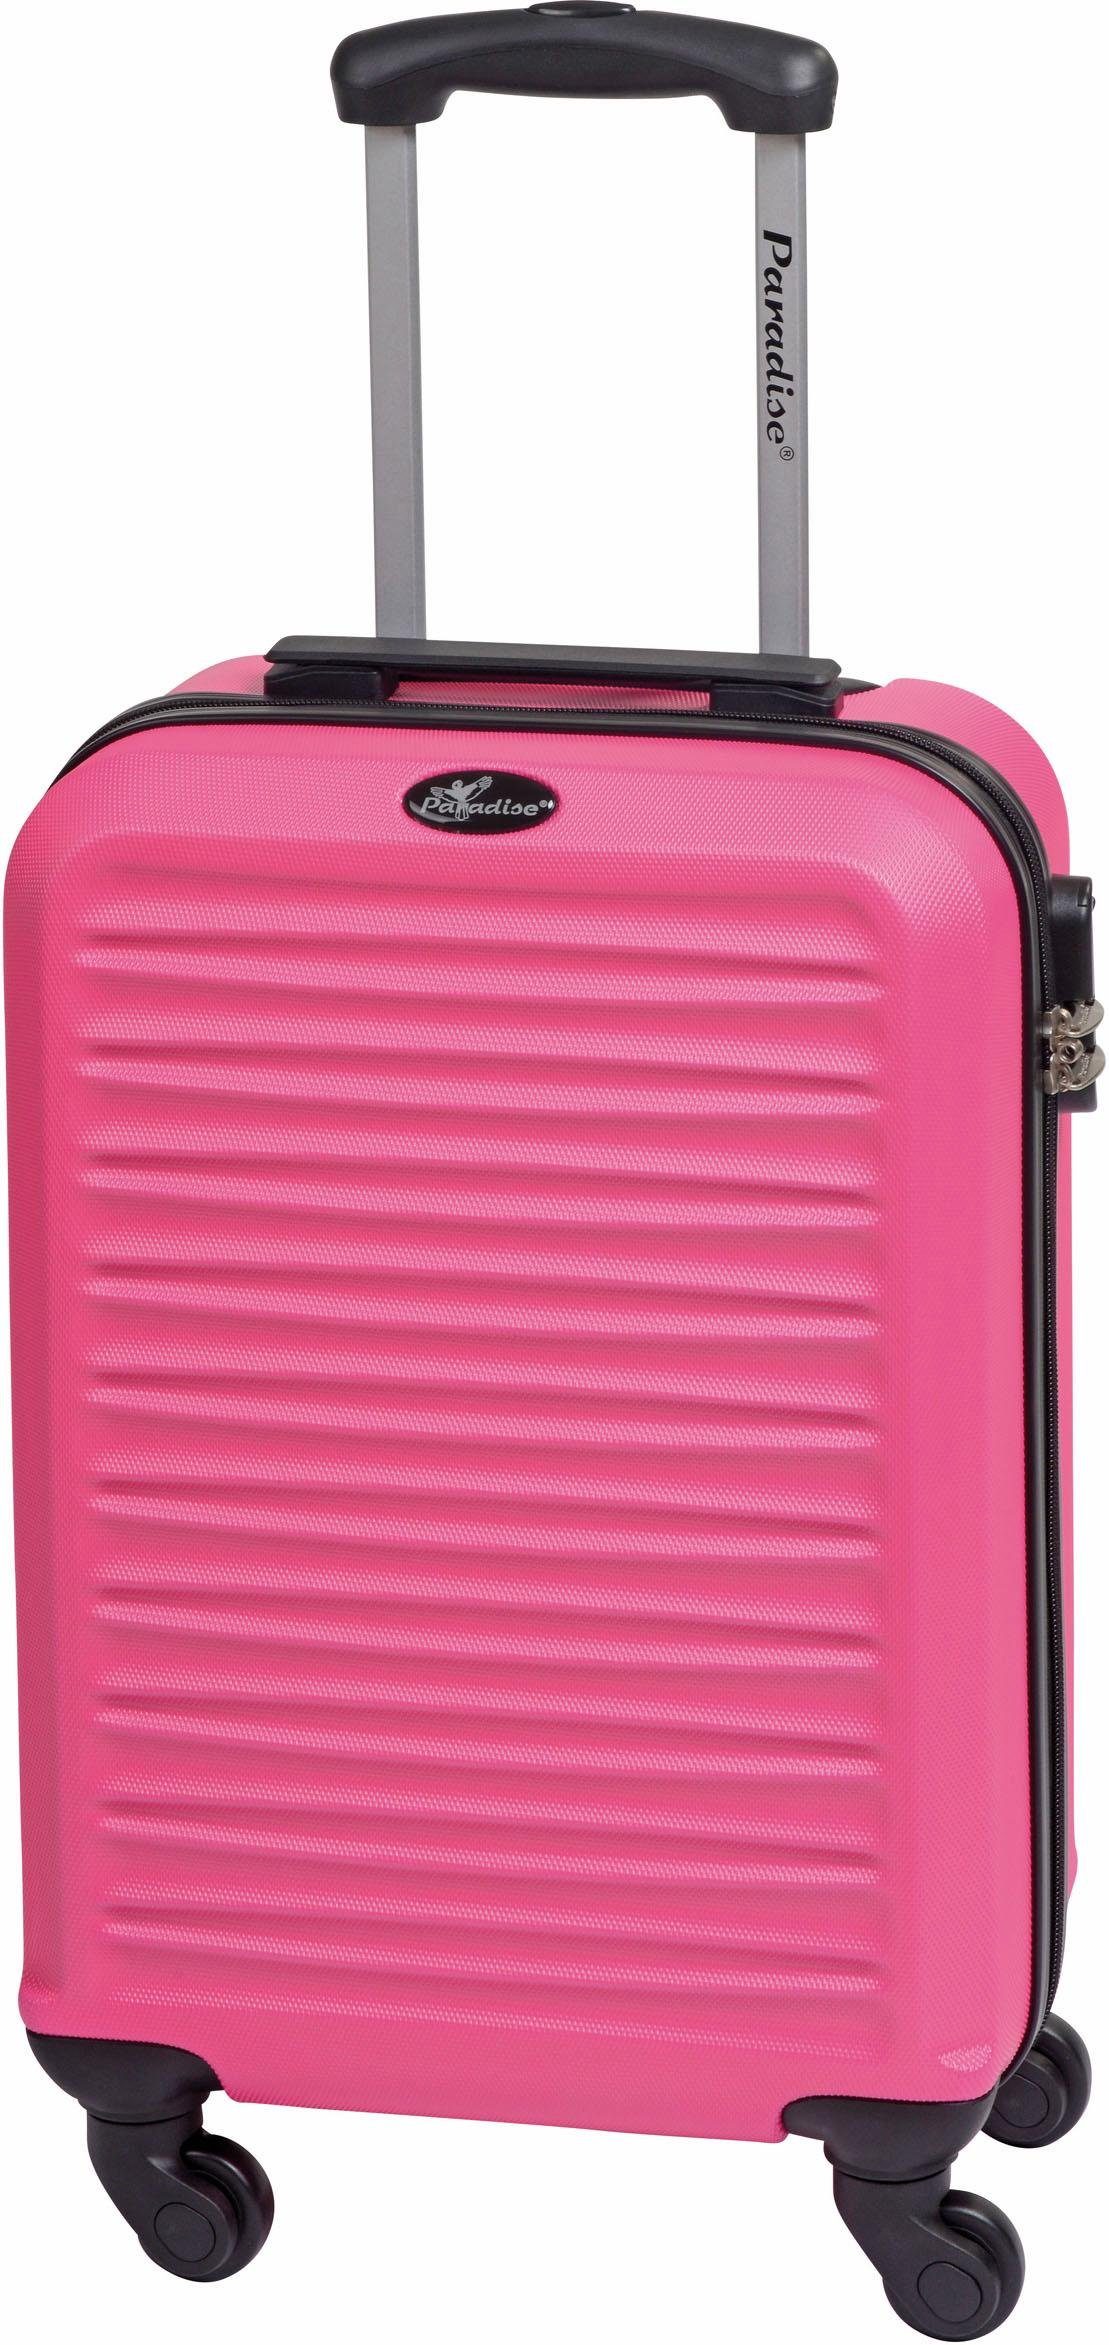 Paradise by Rollen, Trolleyset 4 CHECK.IN pink (Set, 3 Havanna, tlg)